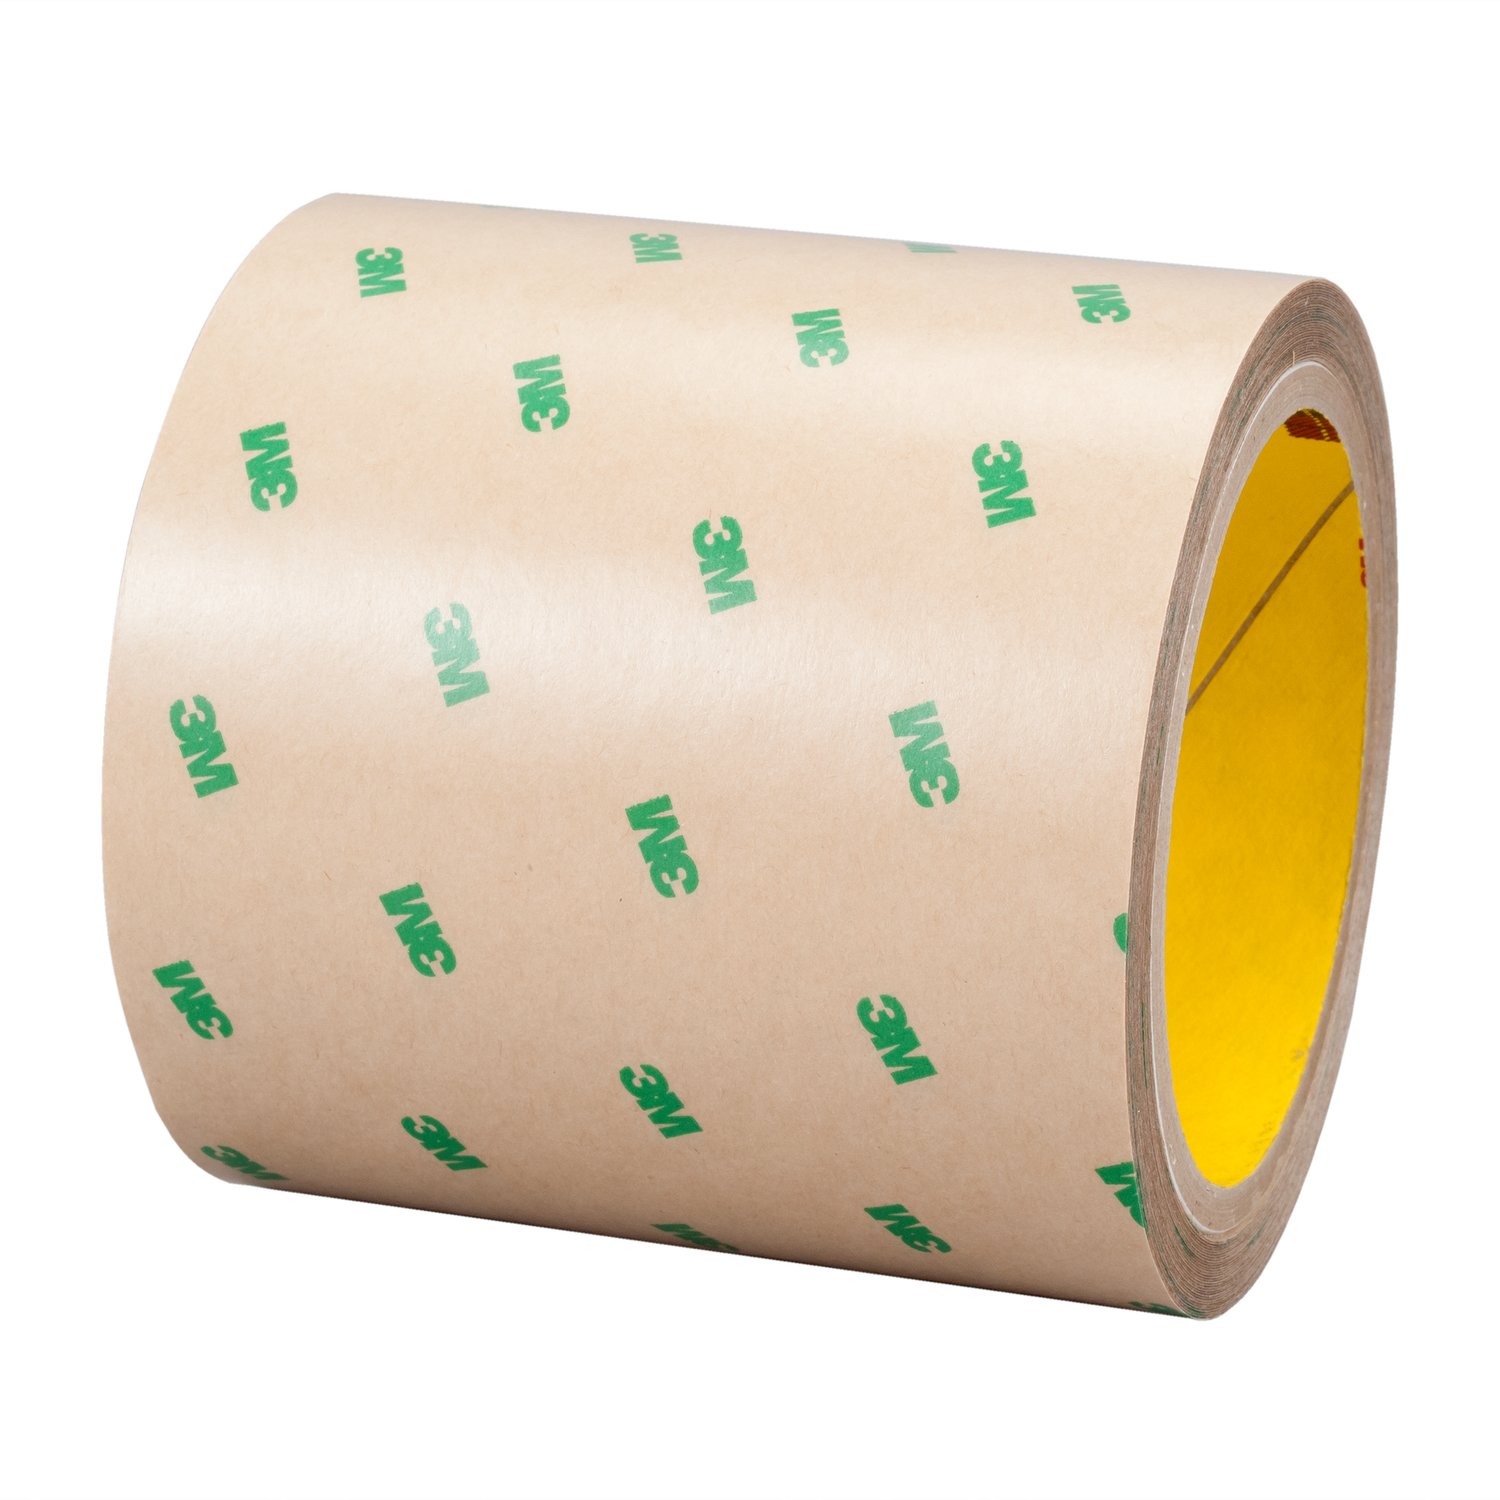 7100307770 - 3M Double Coated Tape 99786NP+, Transparent, 5.5 mil, Roll, Config